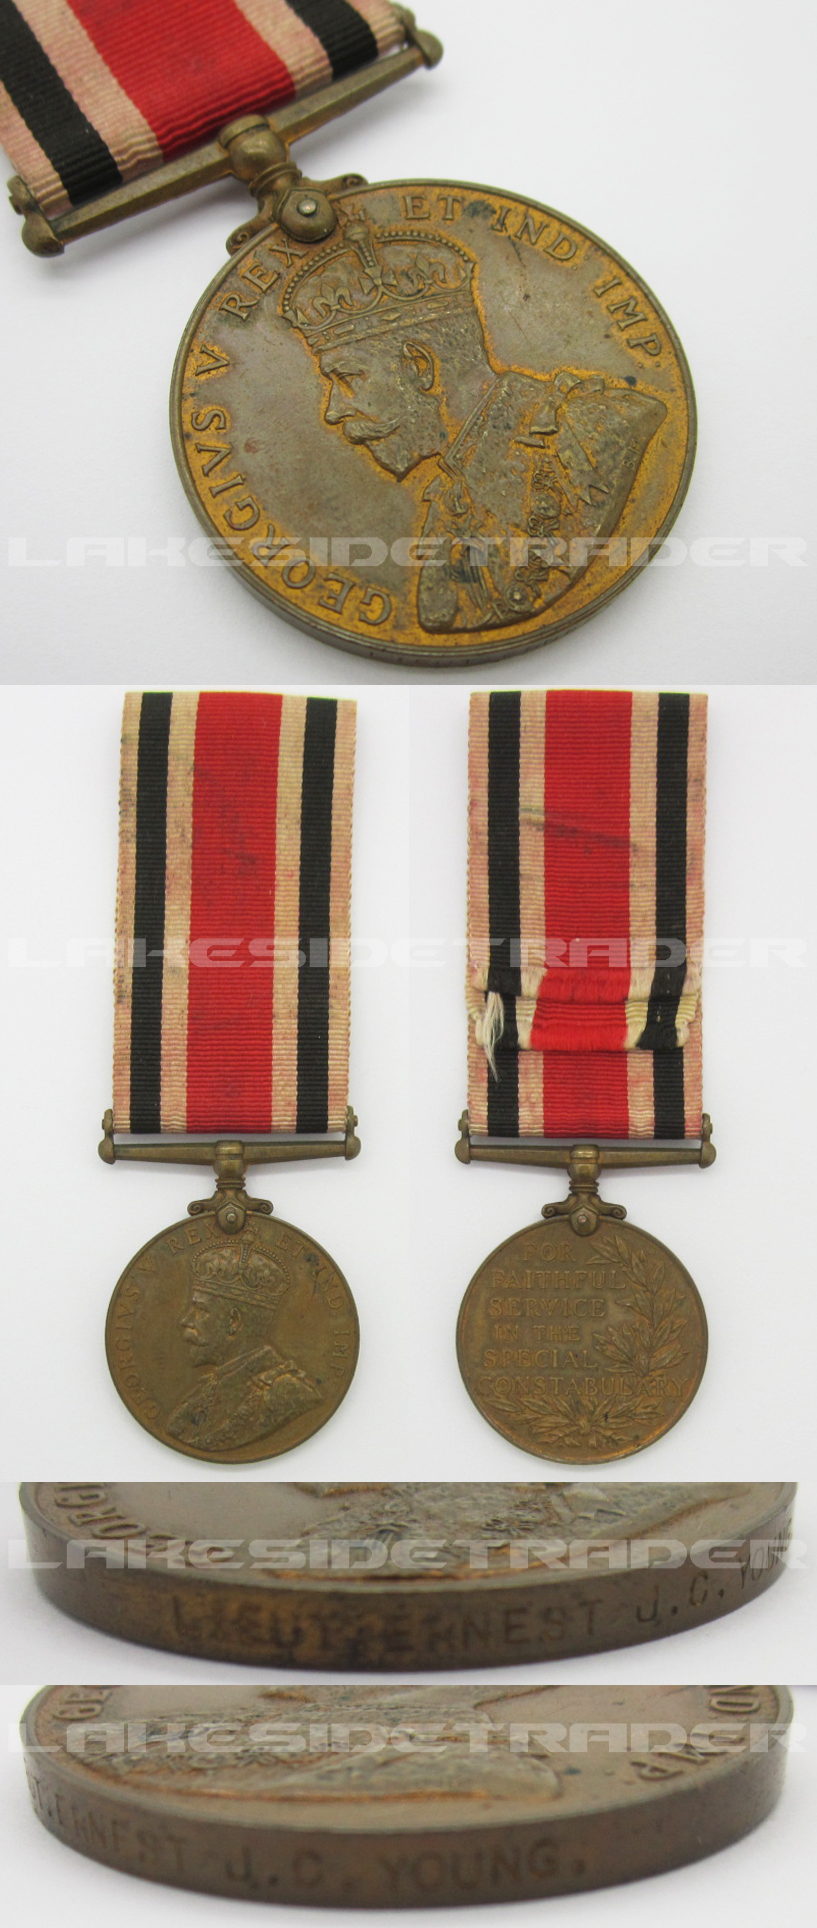 United Kingdom Special Constabulary Long Service Medal